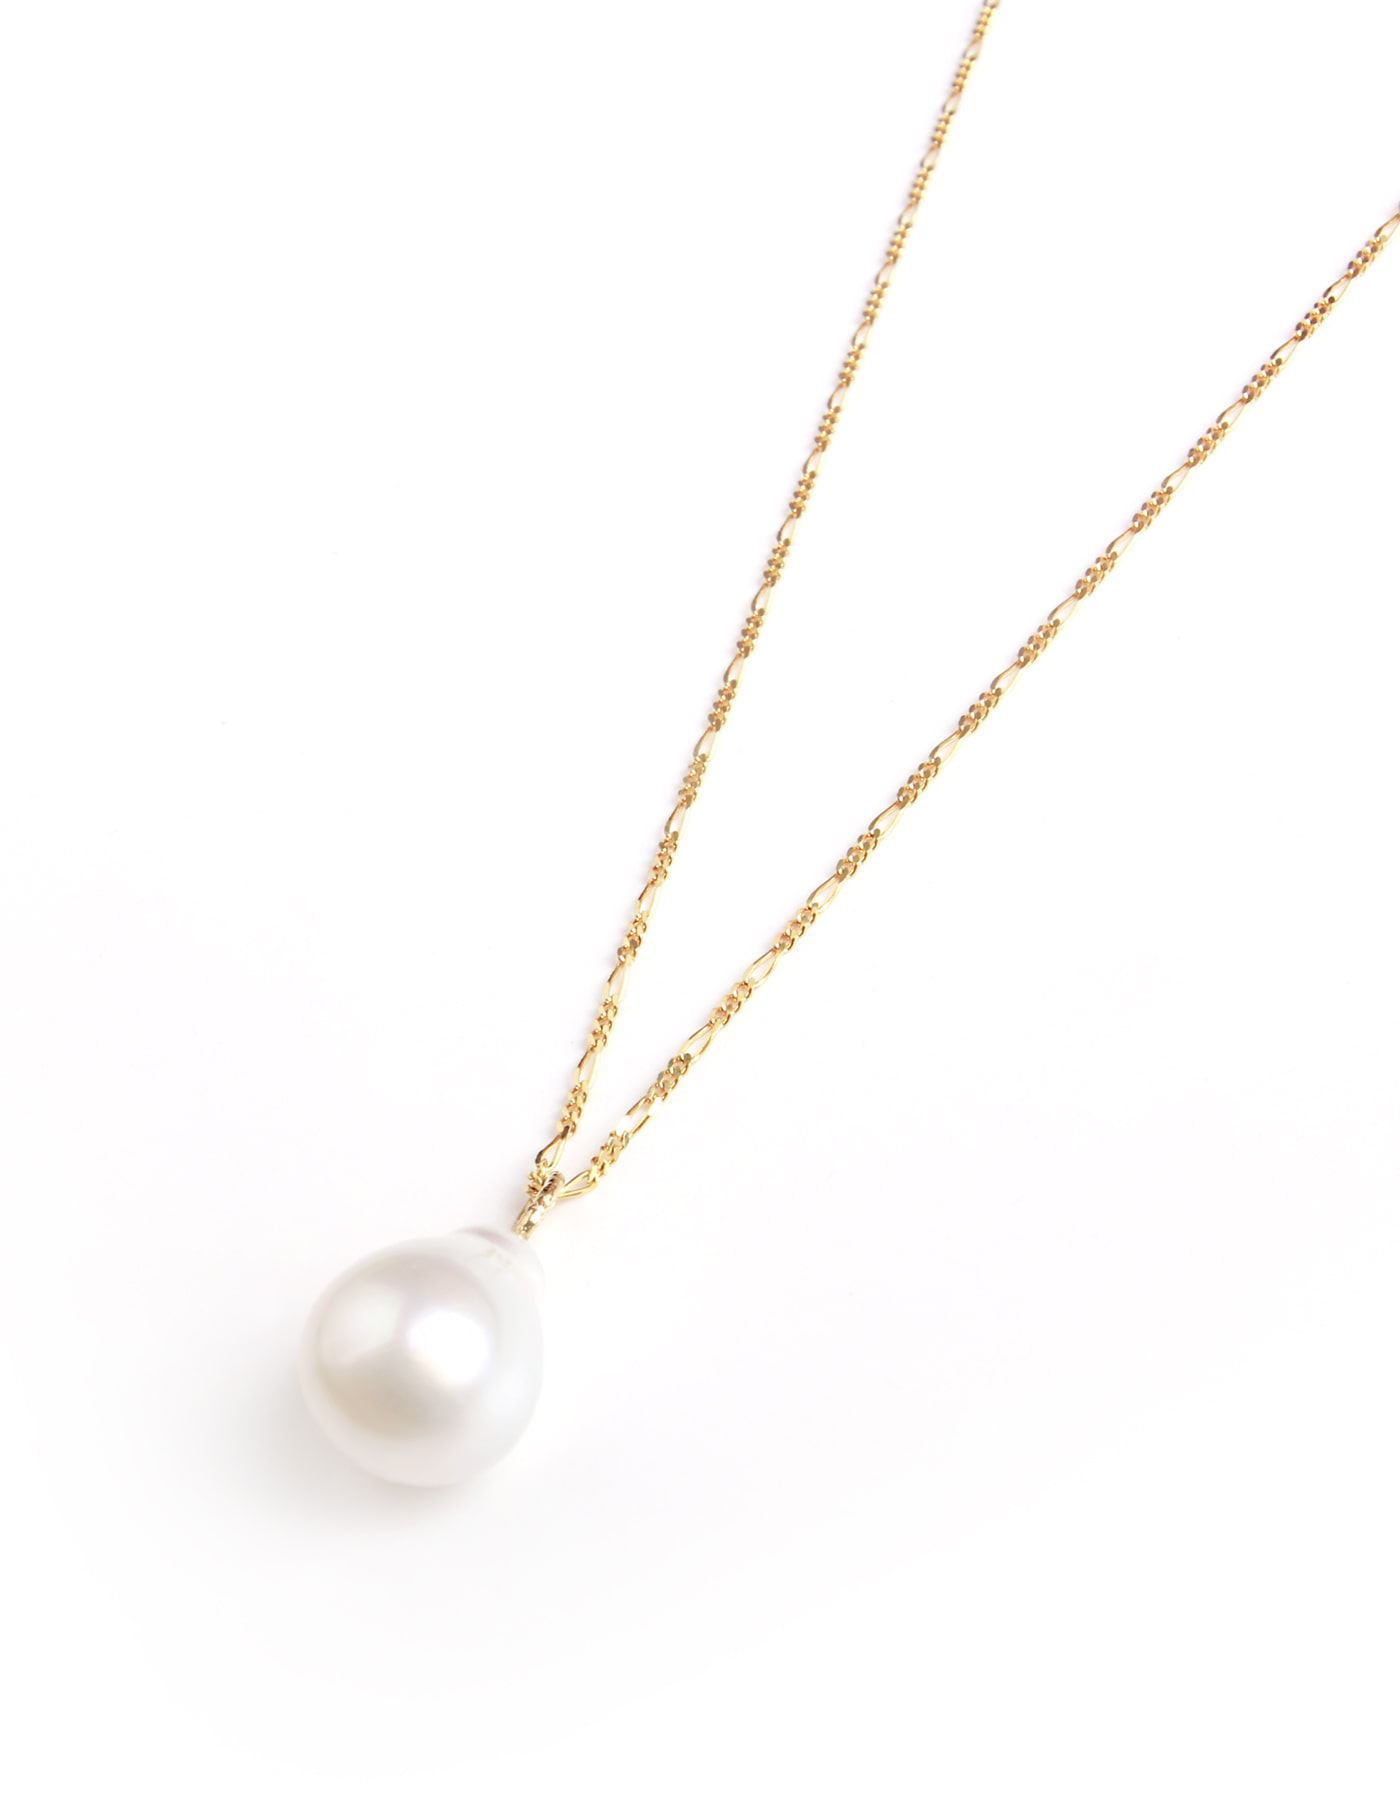 [14k] White Baroque Pearl Necklace